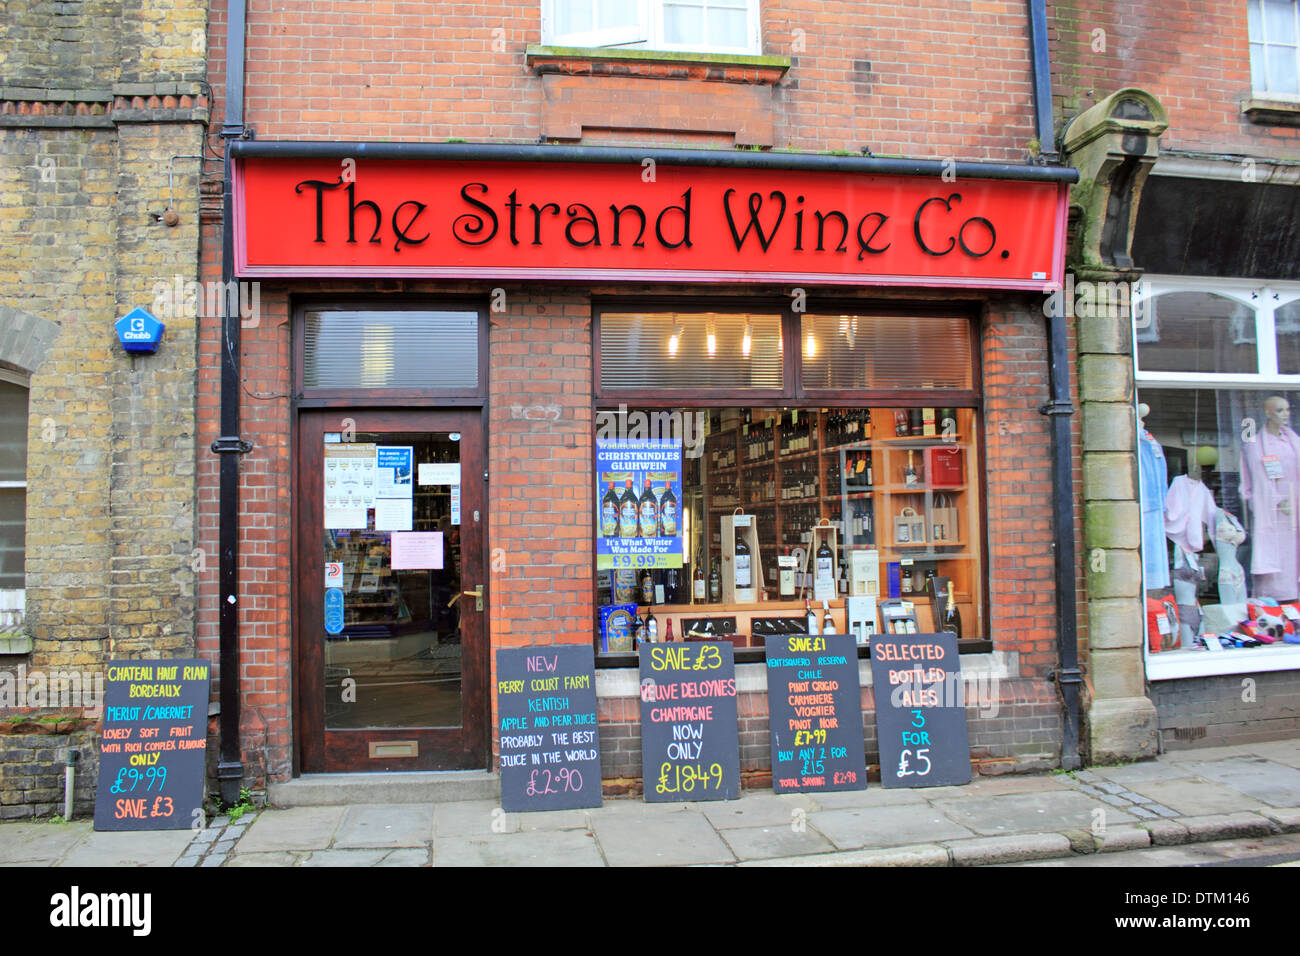 The Strand Wine Co. in historic town of Sandwich, Kent, England, UK. Stock Photo